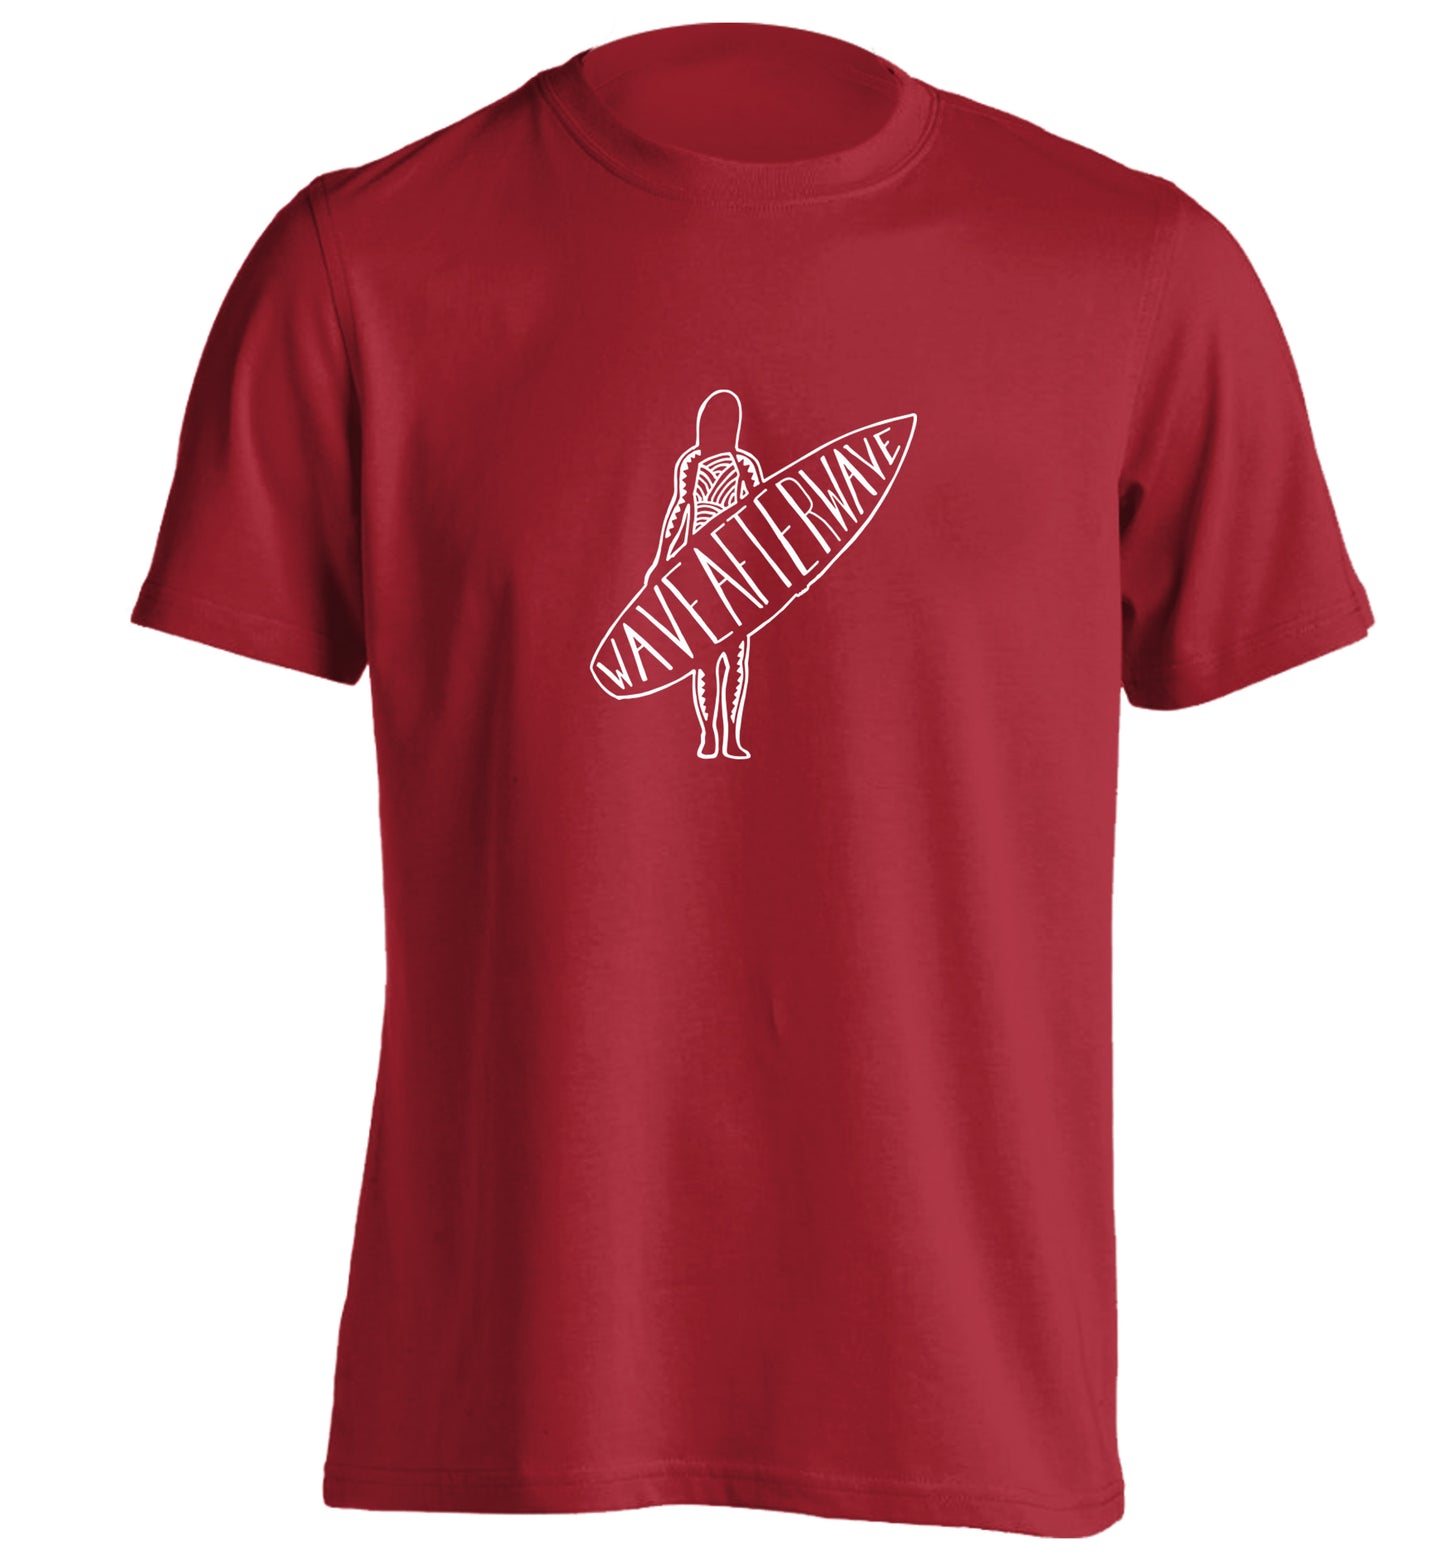 Wave after wave adults unisex red Tshirt 2XL